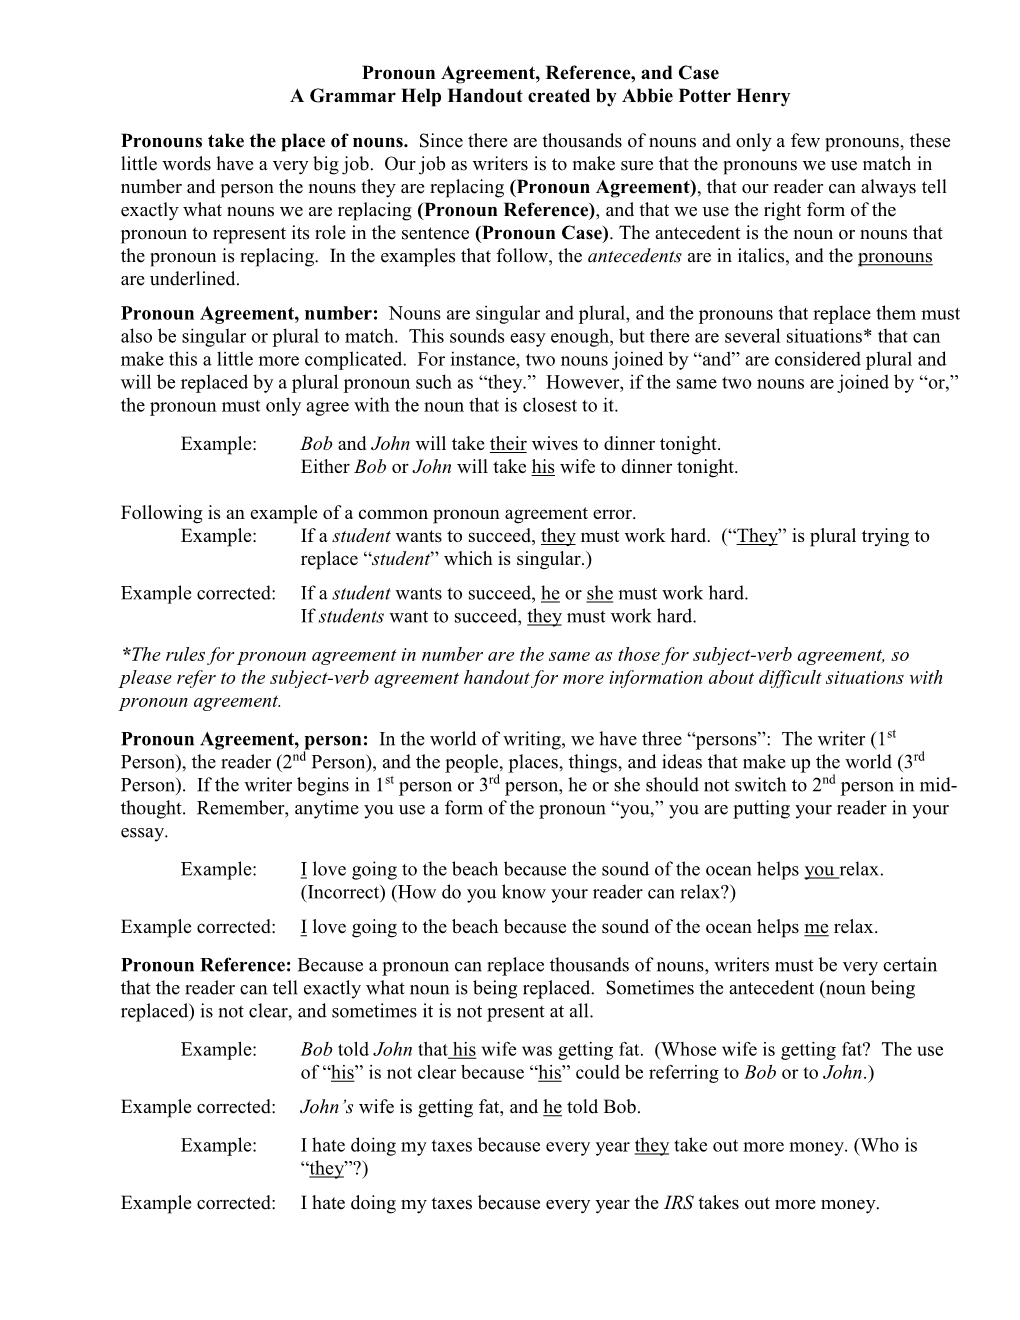 Pronoun Agreement, Reference, and Case a Grammar Help Handout Created by Abbie Potter Henry